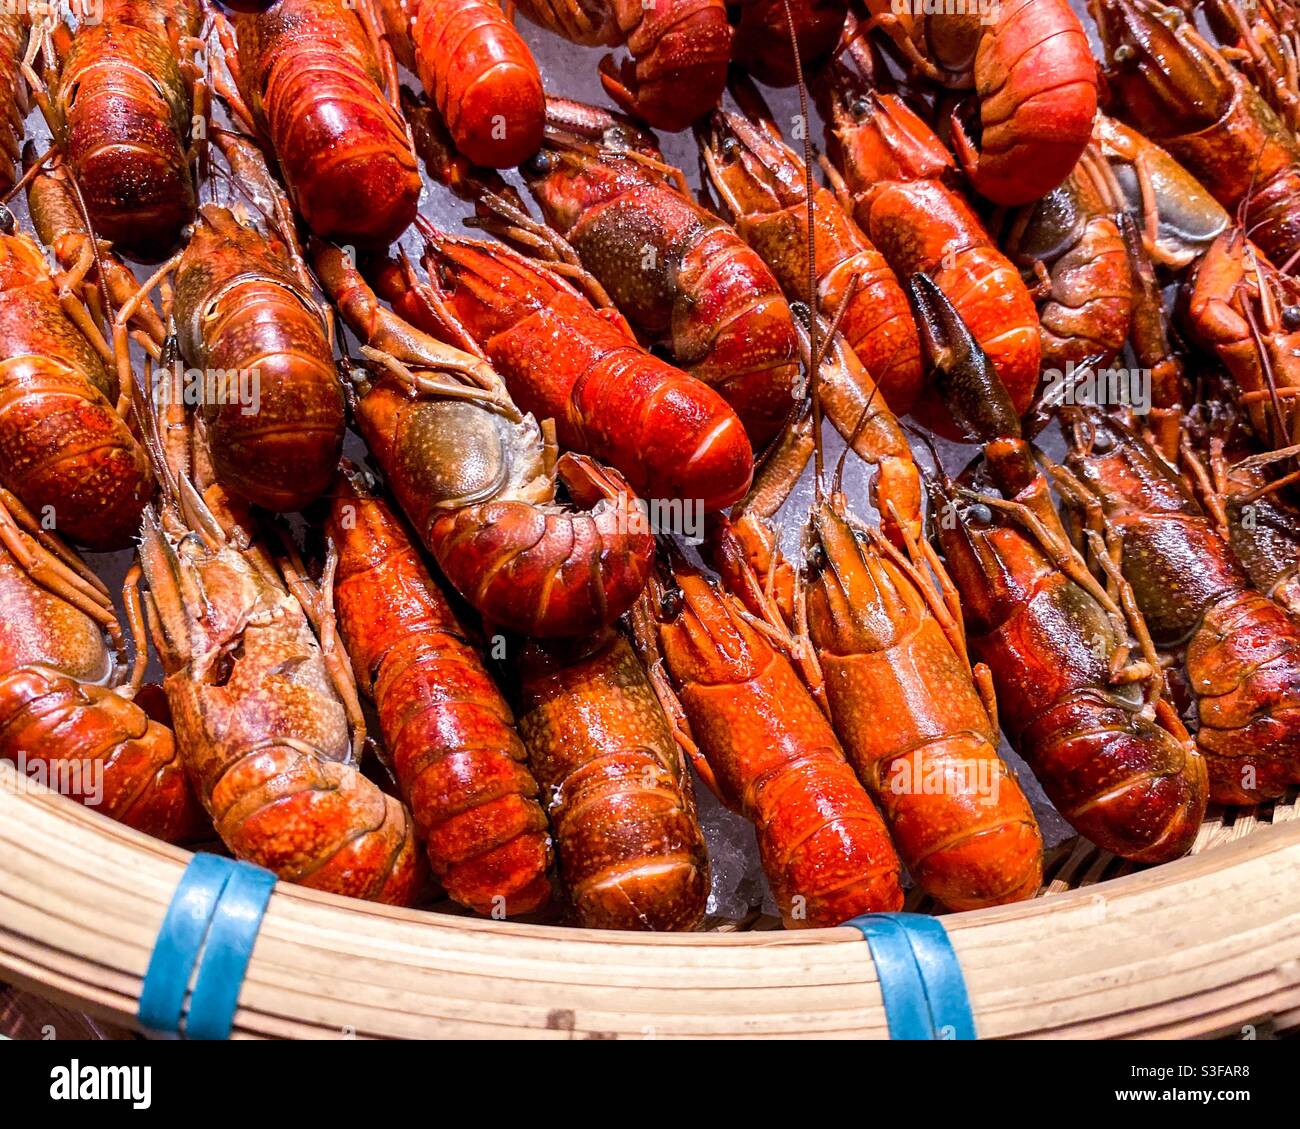 Scrumptious yabbies feast for all seafood lover Stock Photo